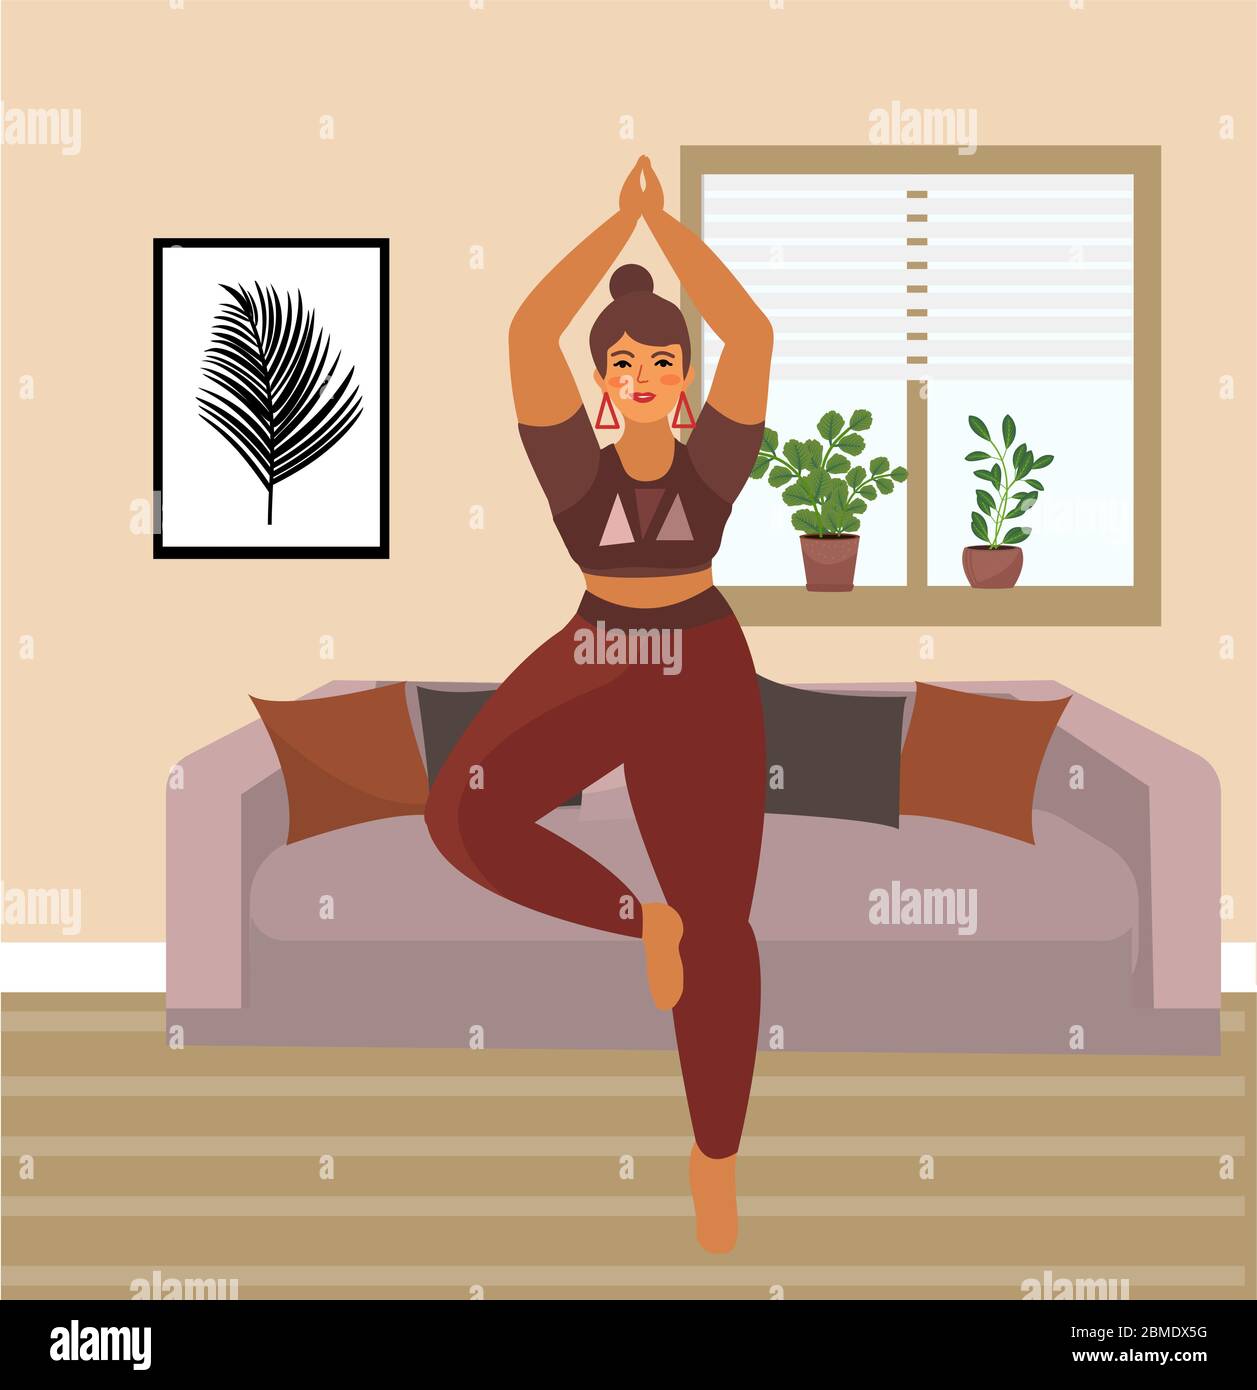 Plus size abstract woman workout in yoga poses. Bodypositive lady icons  set. Active overweight girl. Up dog, lotus, monkey yoga poses vector  illustration 11016732 Vector Art at Vecteezy